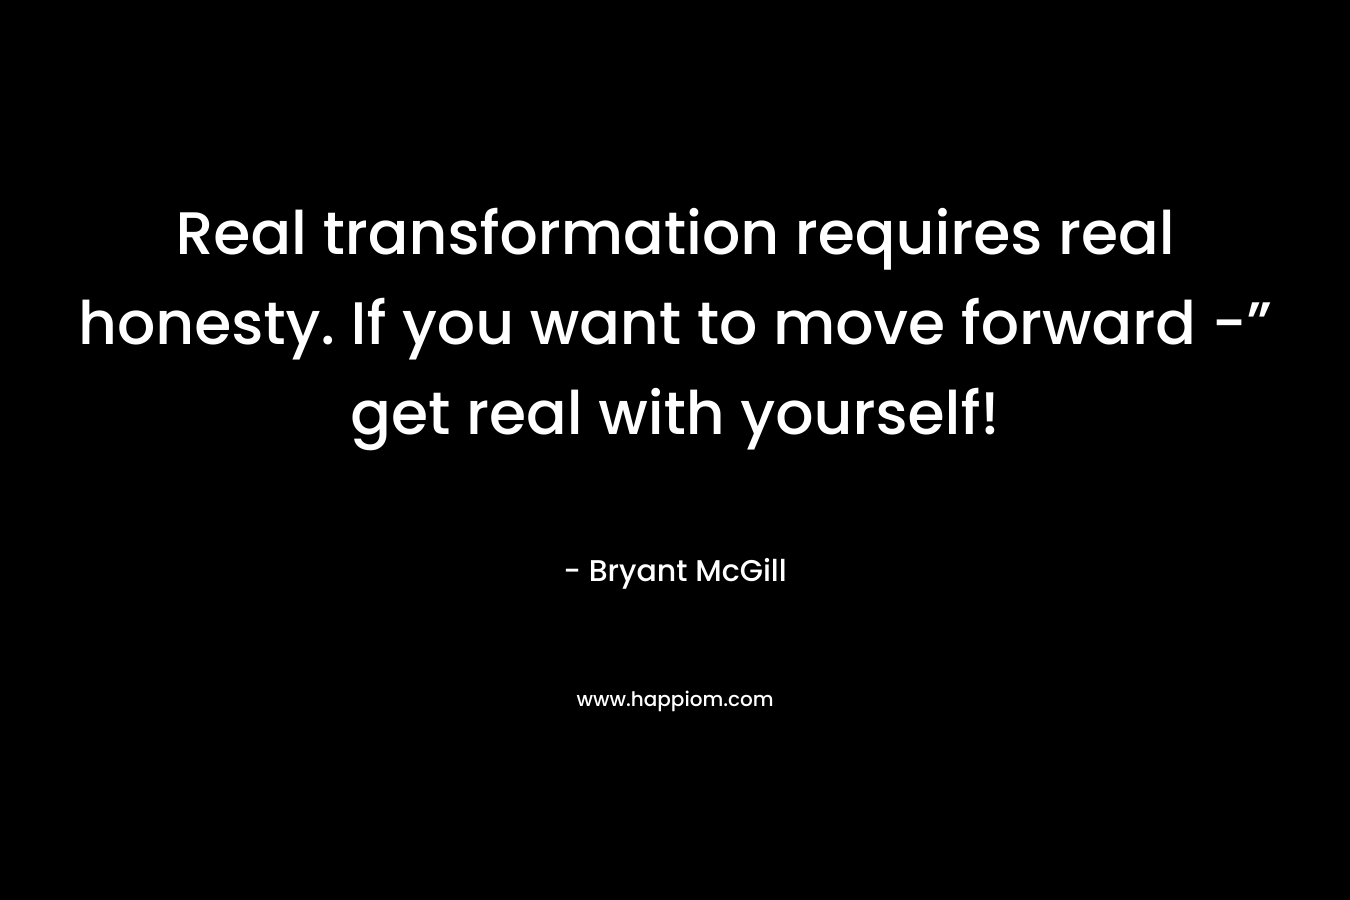 Real transformation requires real honesty. If you want to move forward -” get real with yourself!